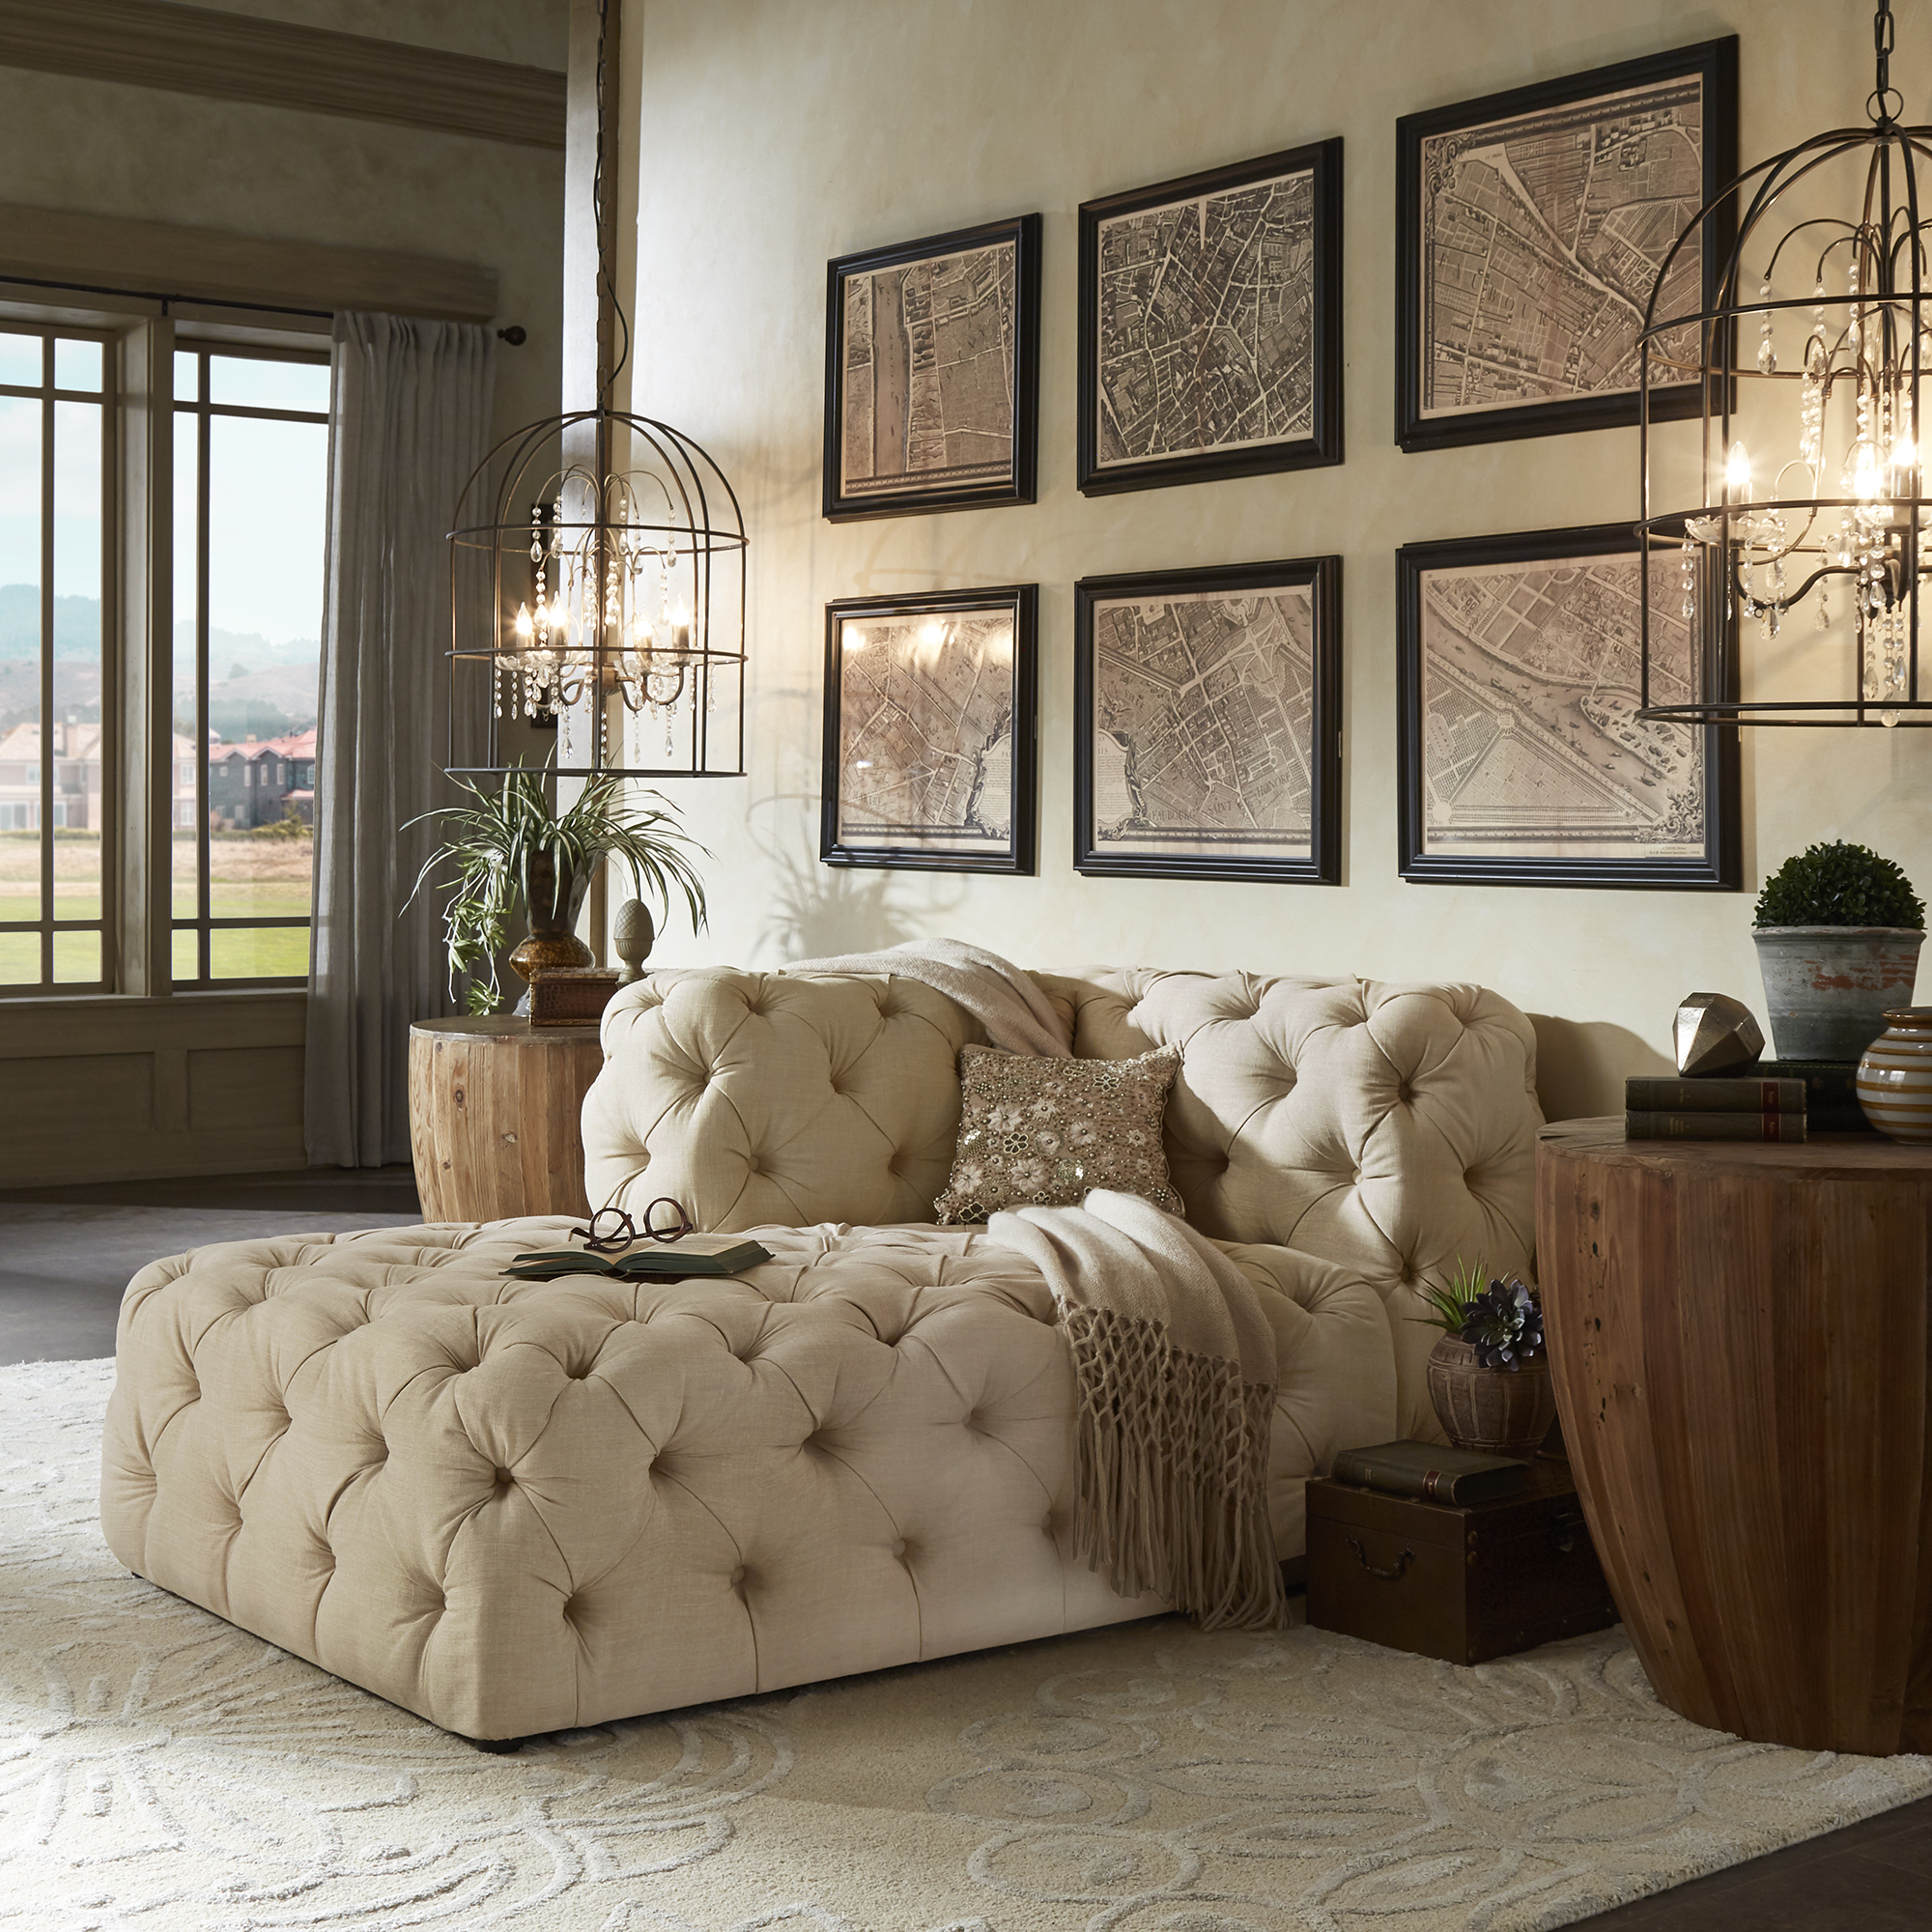 Beige Linen Tufted Chesterfield Sectional Chaise Lounge